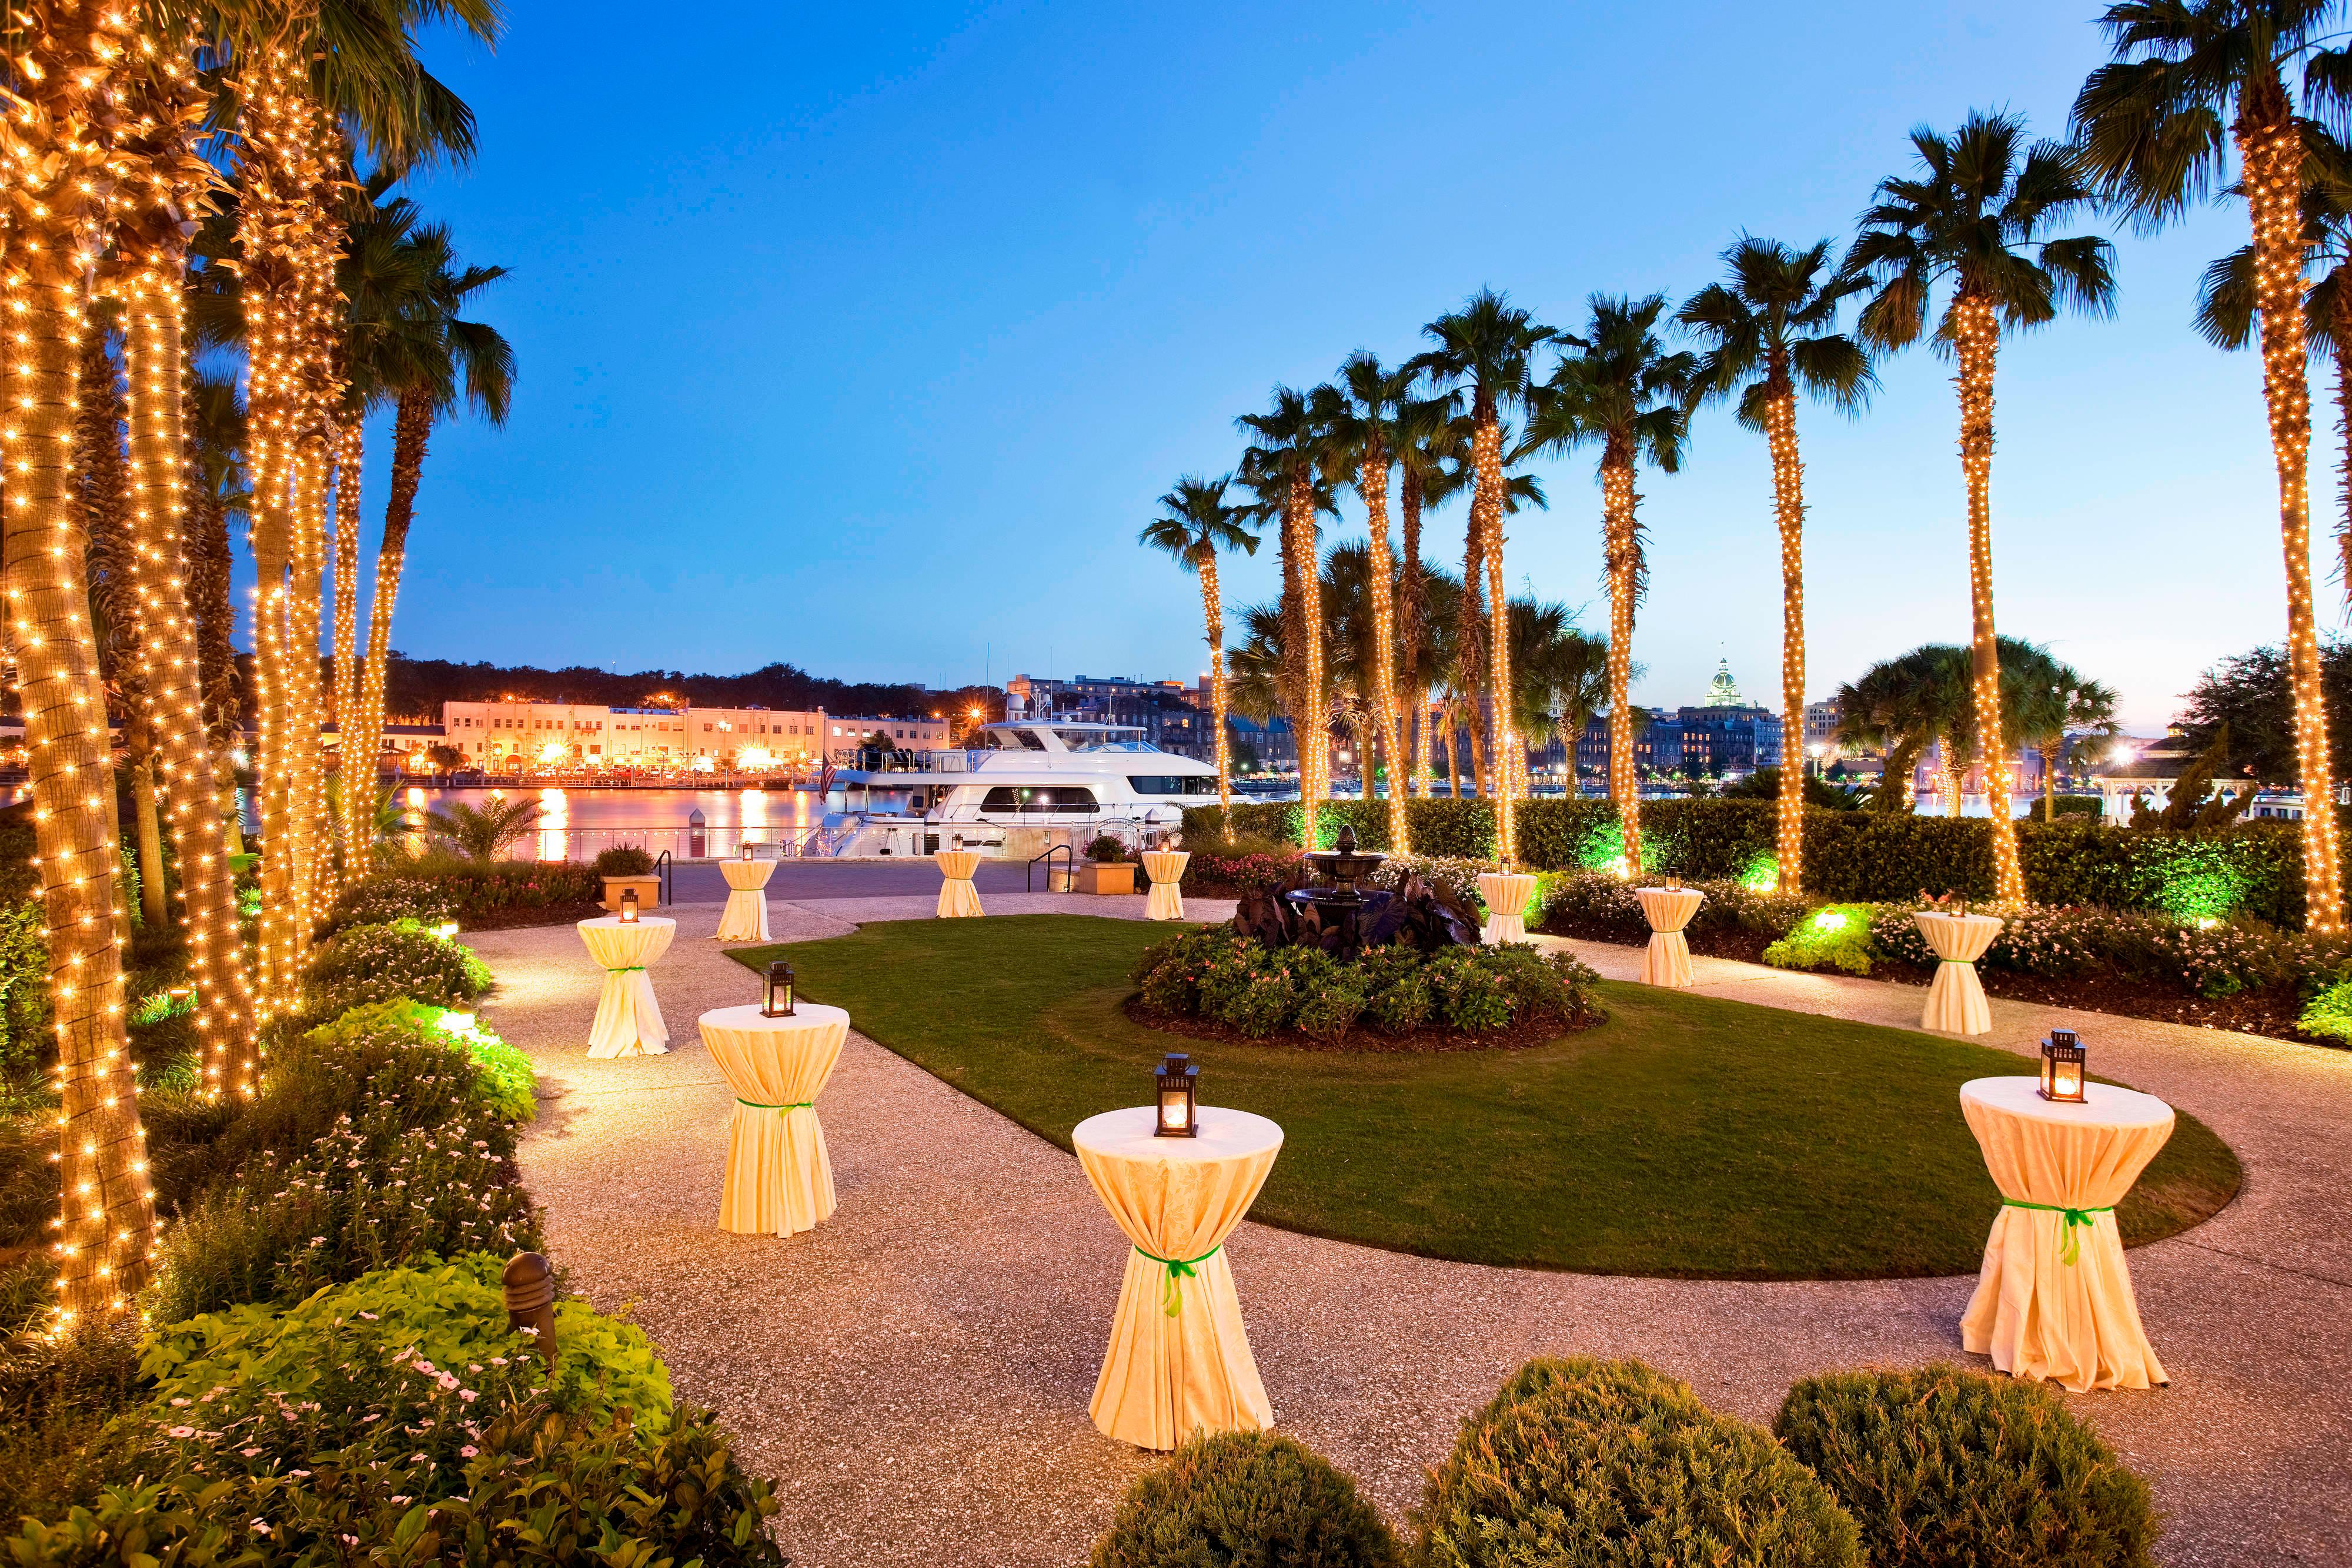 Landscaped oval lawn on the waterfront lined with palm trees wrapped in white string lights